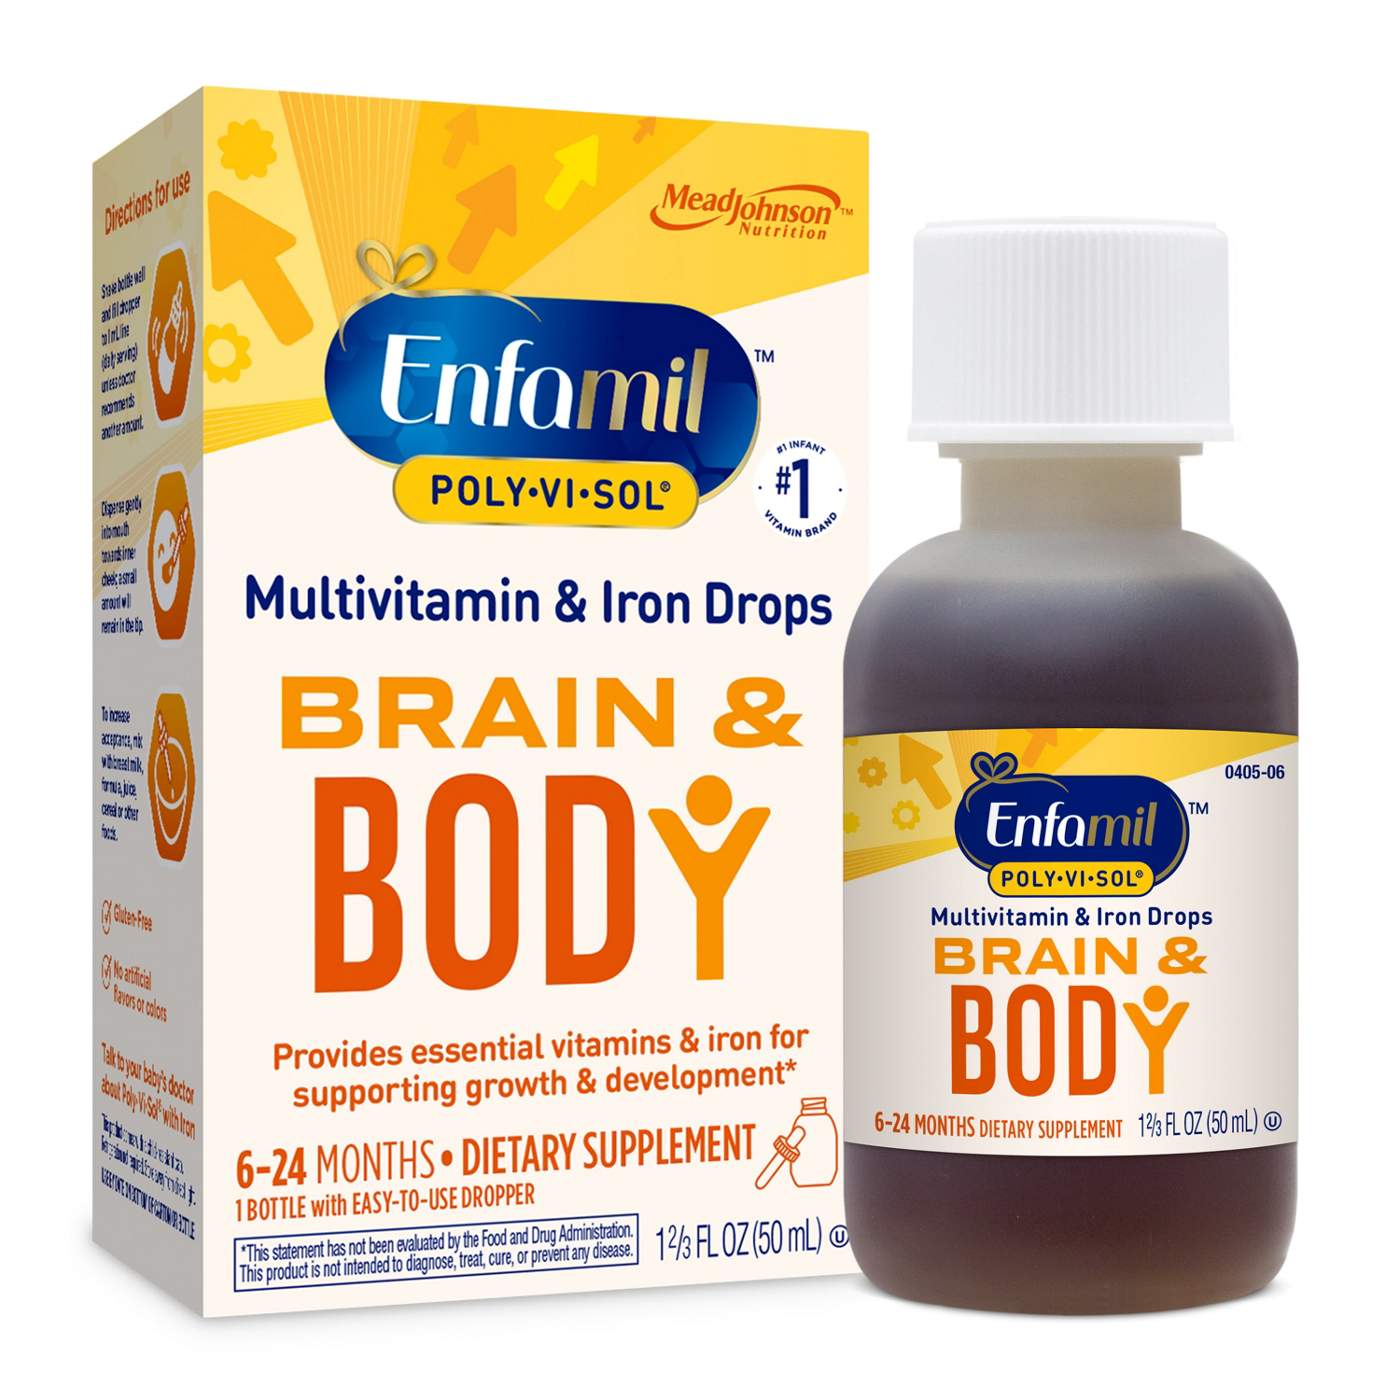 Enfamil Poly-Vi-Sol with Iron Multivitamin Supplement Drops for Infants and Toddlers; image 1 of 9